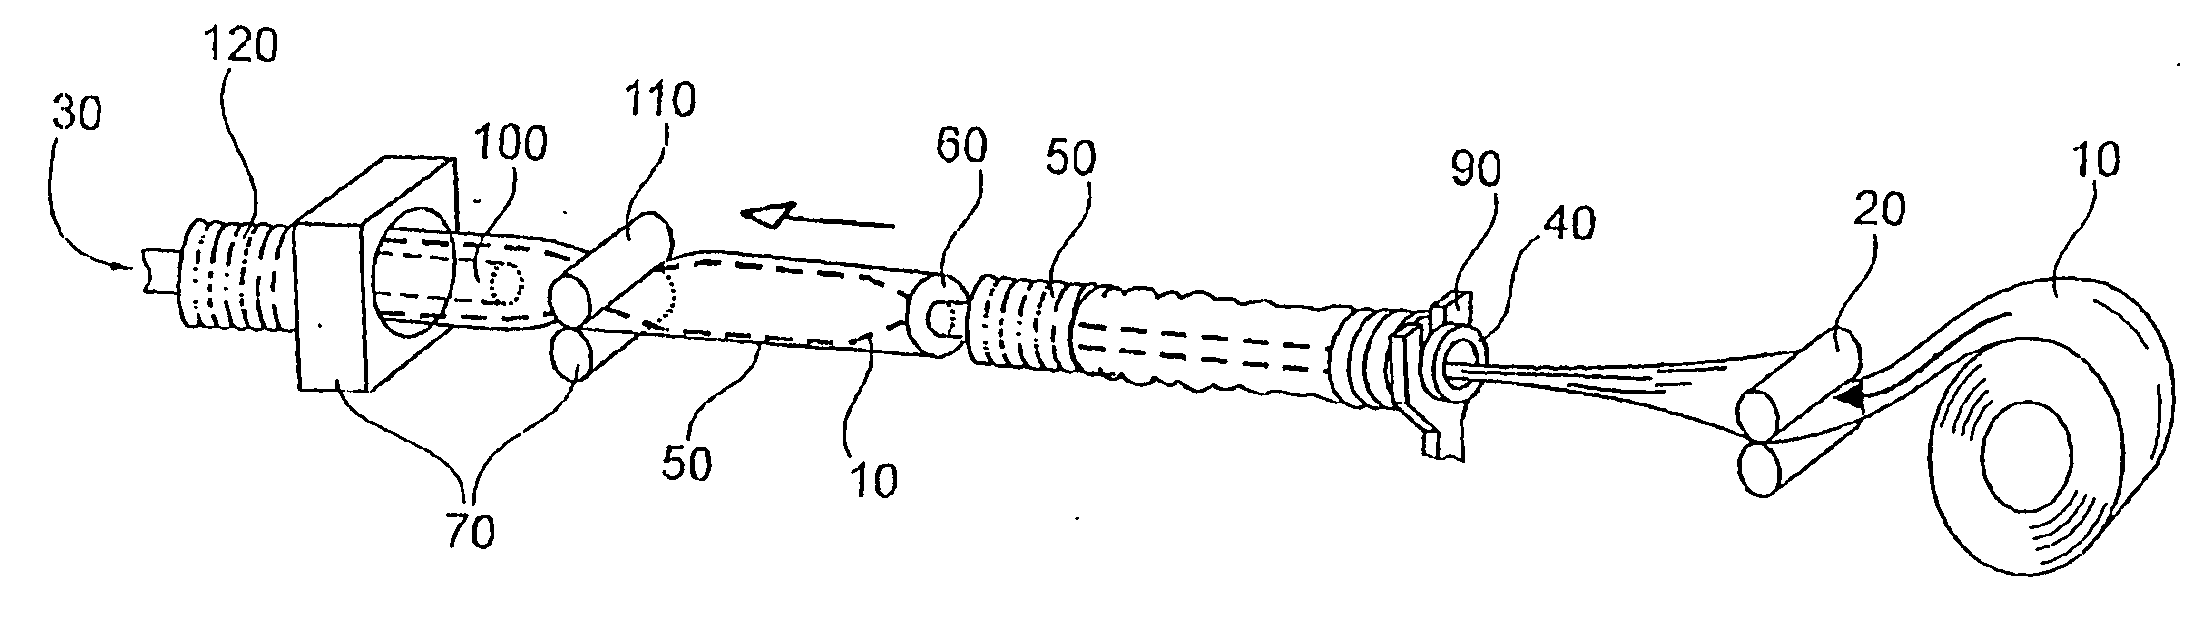 Process For Producing A Composite Food Casing